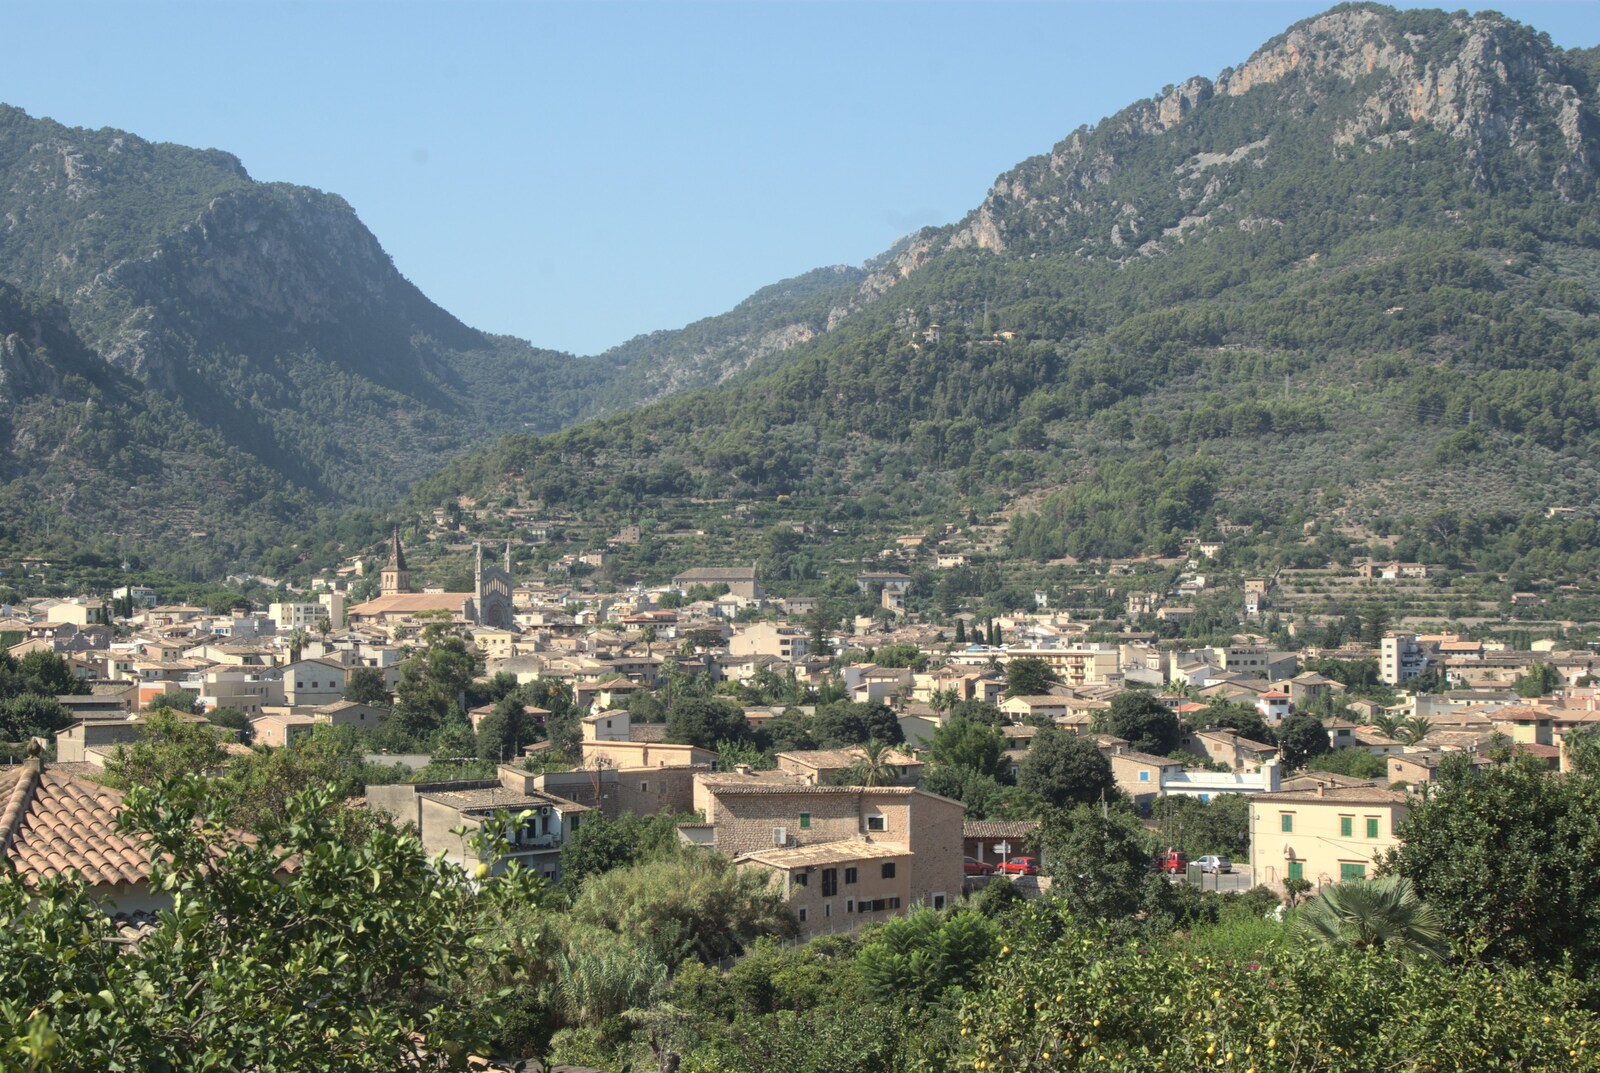 The view of Soller from up in the hills from A Tram Trip to Port Soller, Mallorca - 18th August 2011